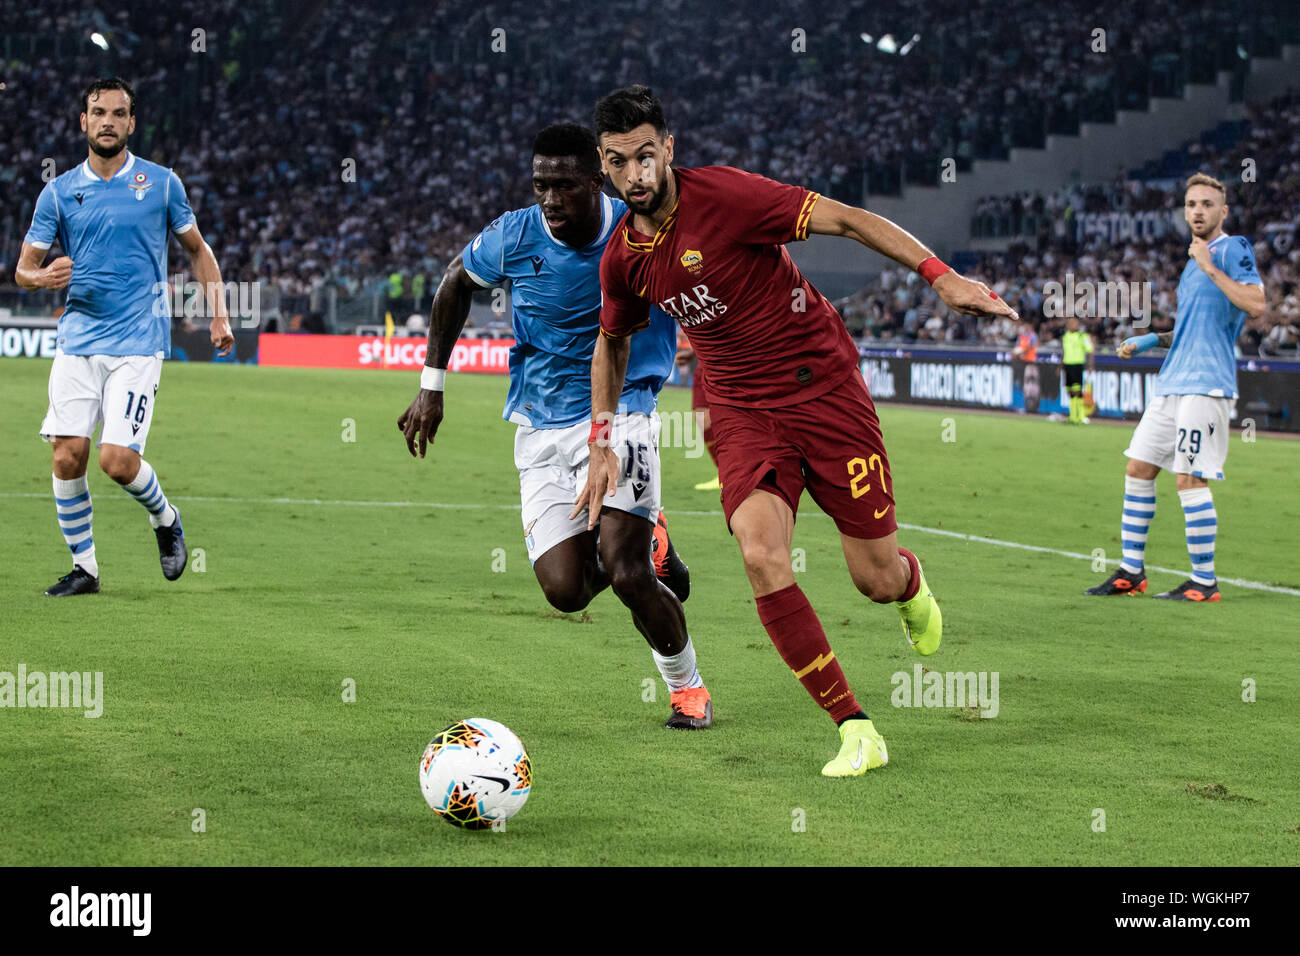 Javier Matias Pastore of AS Roma in action during the Serie A match between Lazio and AS Roma at Olimpico Stadium.(Final score: Lazio 1:1 AS Roma) Stock Photo